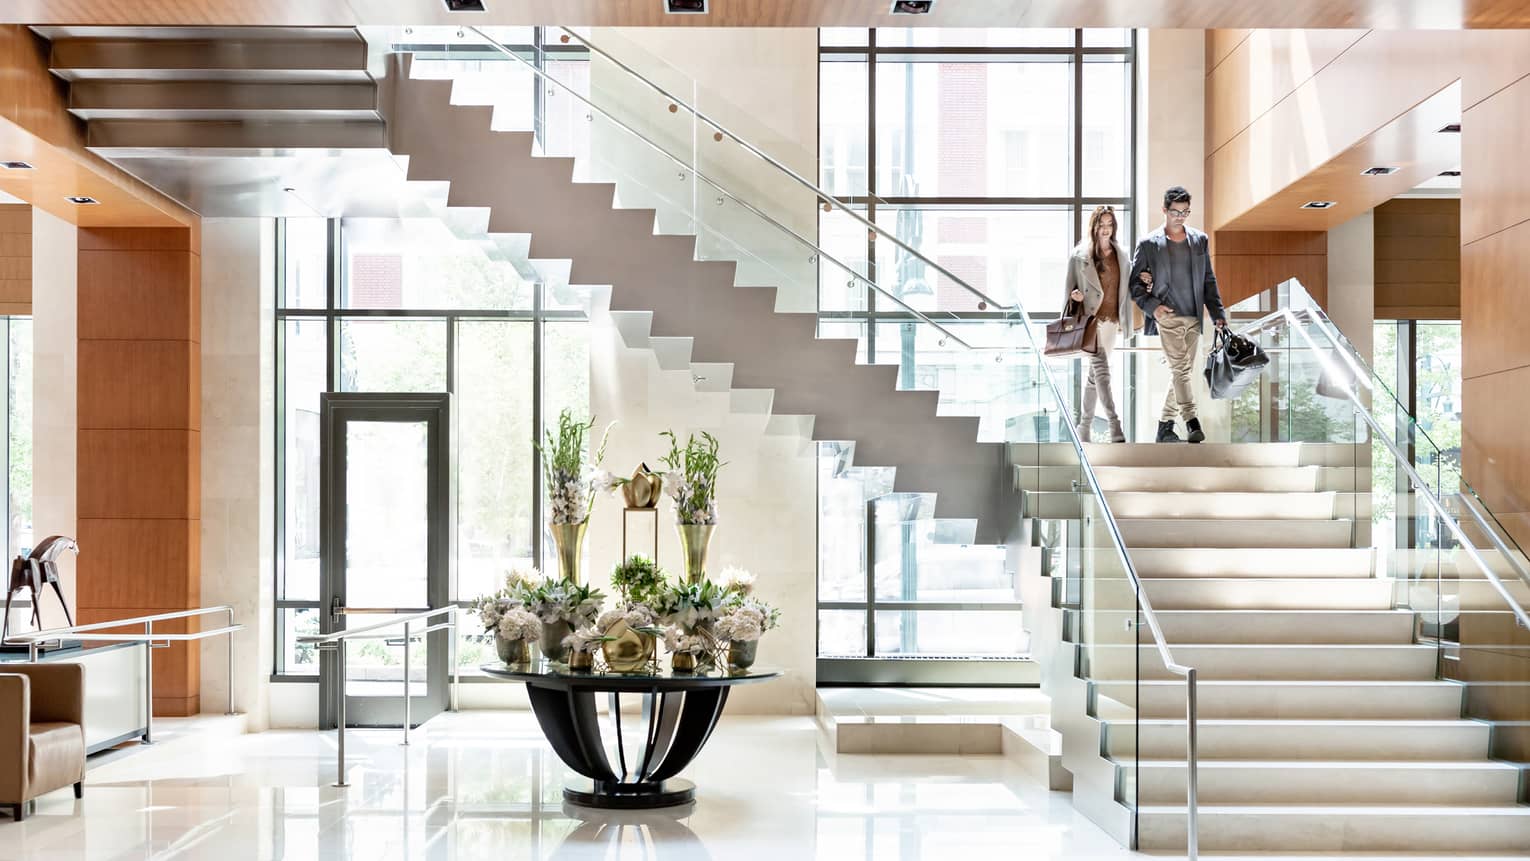 Two people walk down staircase in light-filled hotel lobby